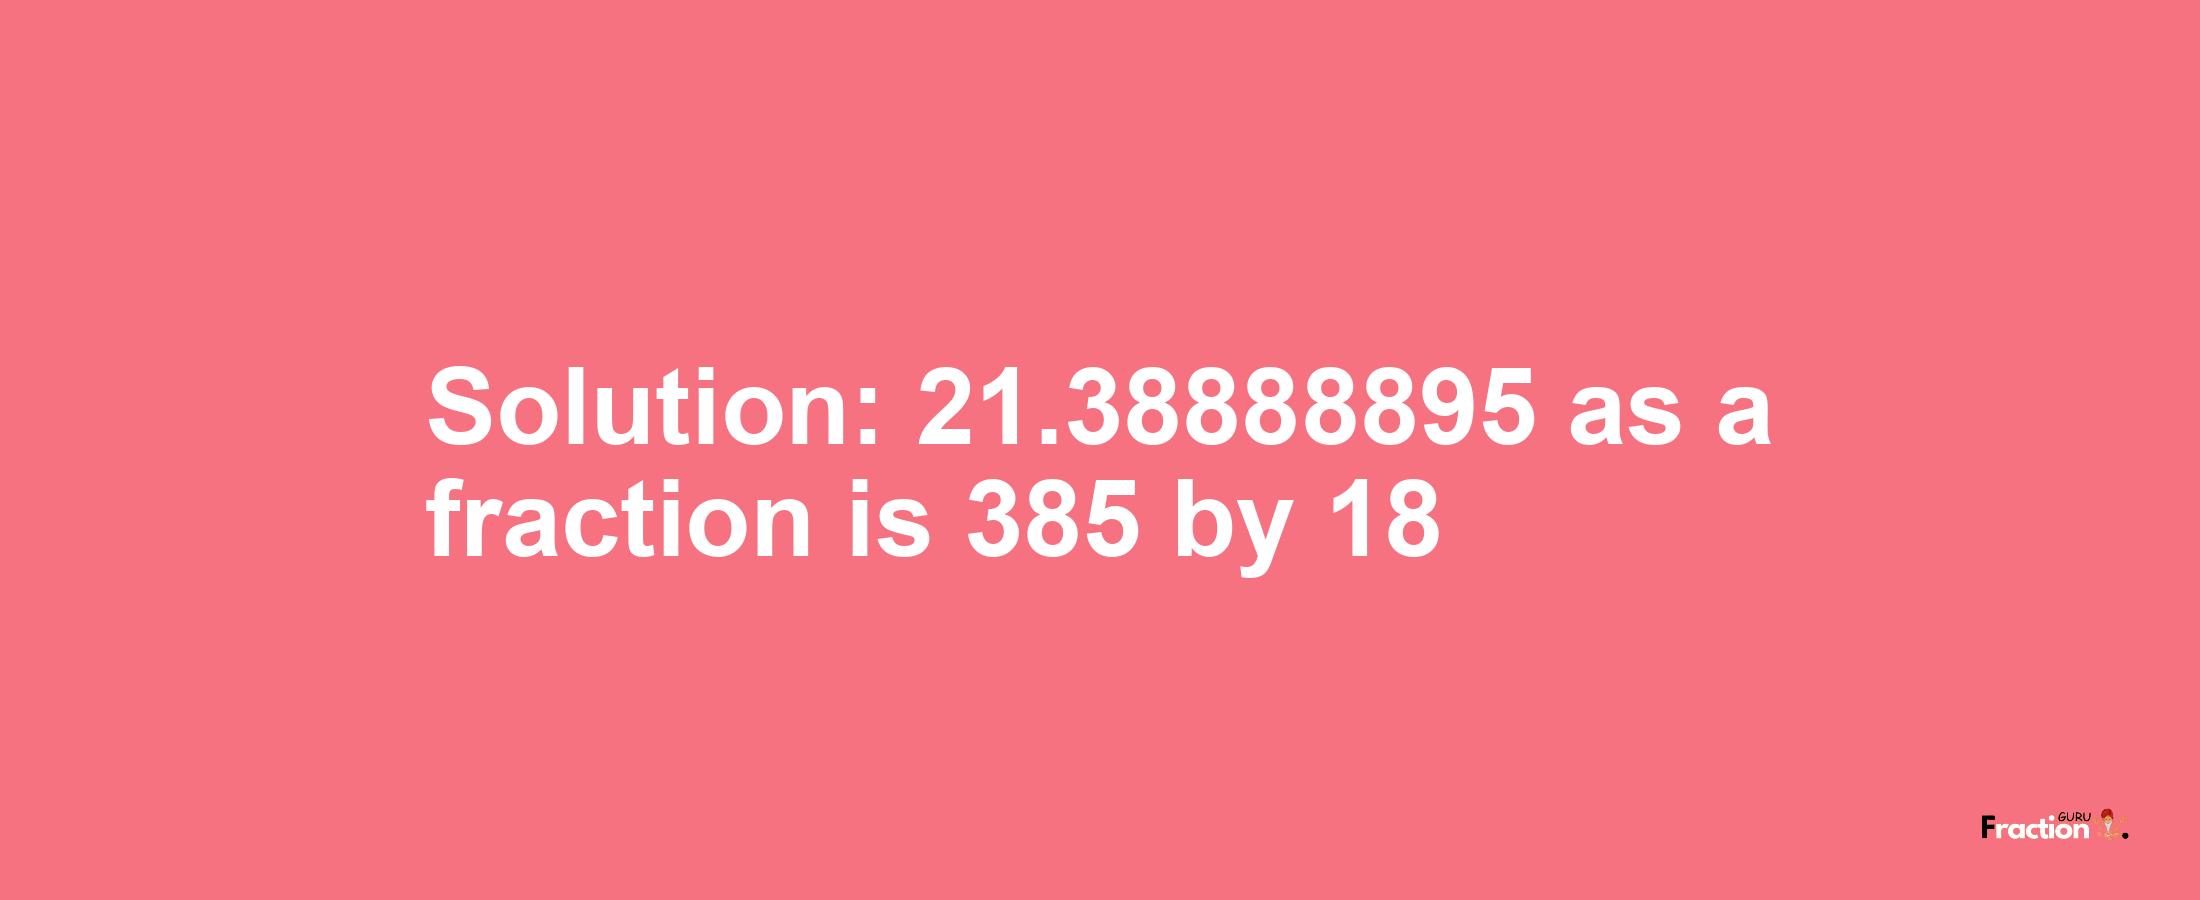 Solution:21.38888895 as a fraction is 385/18